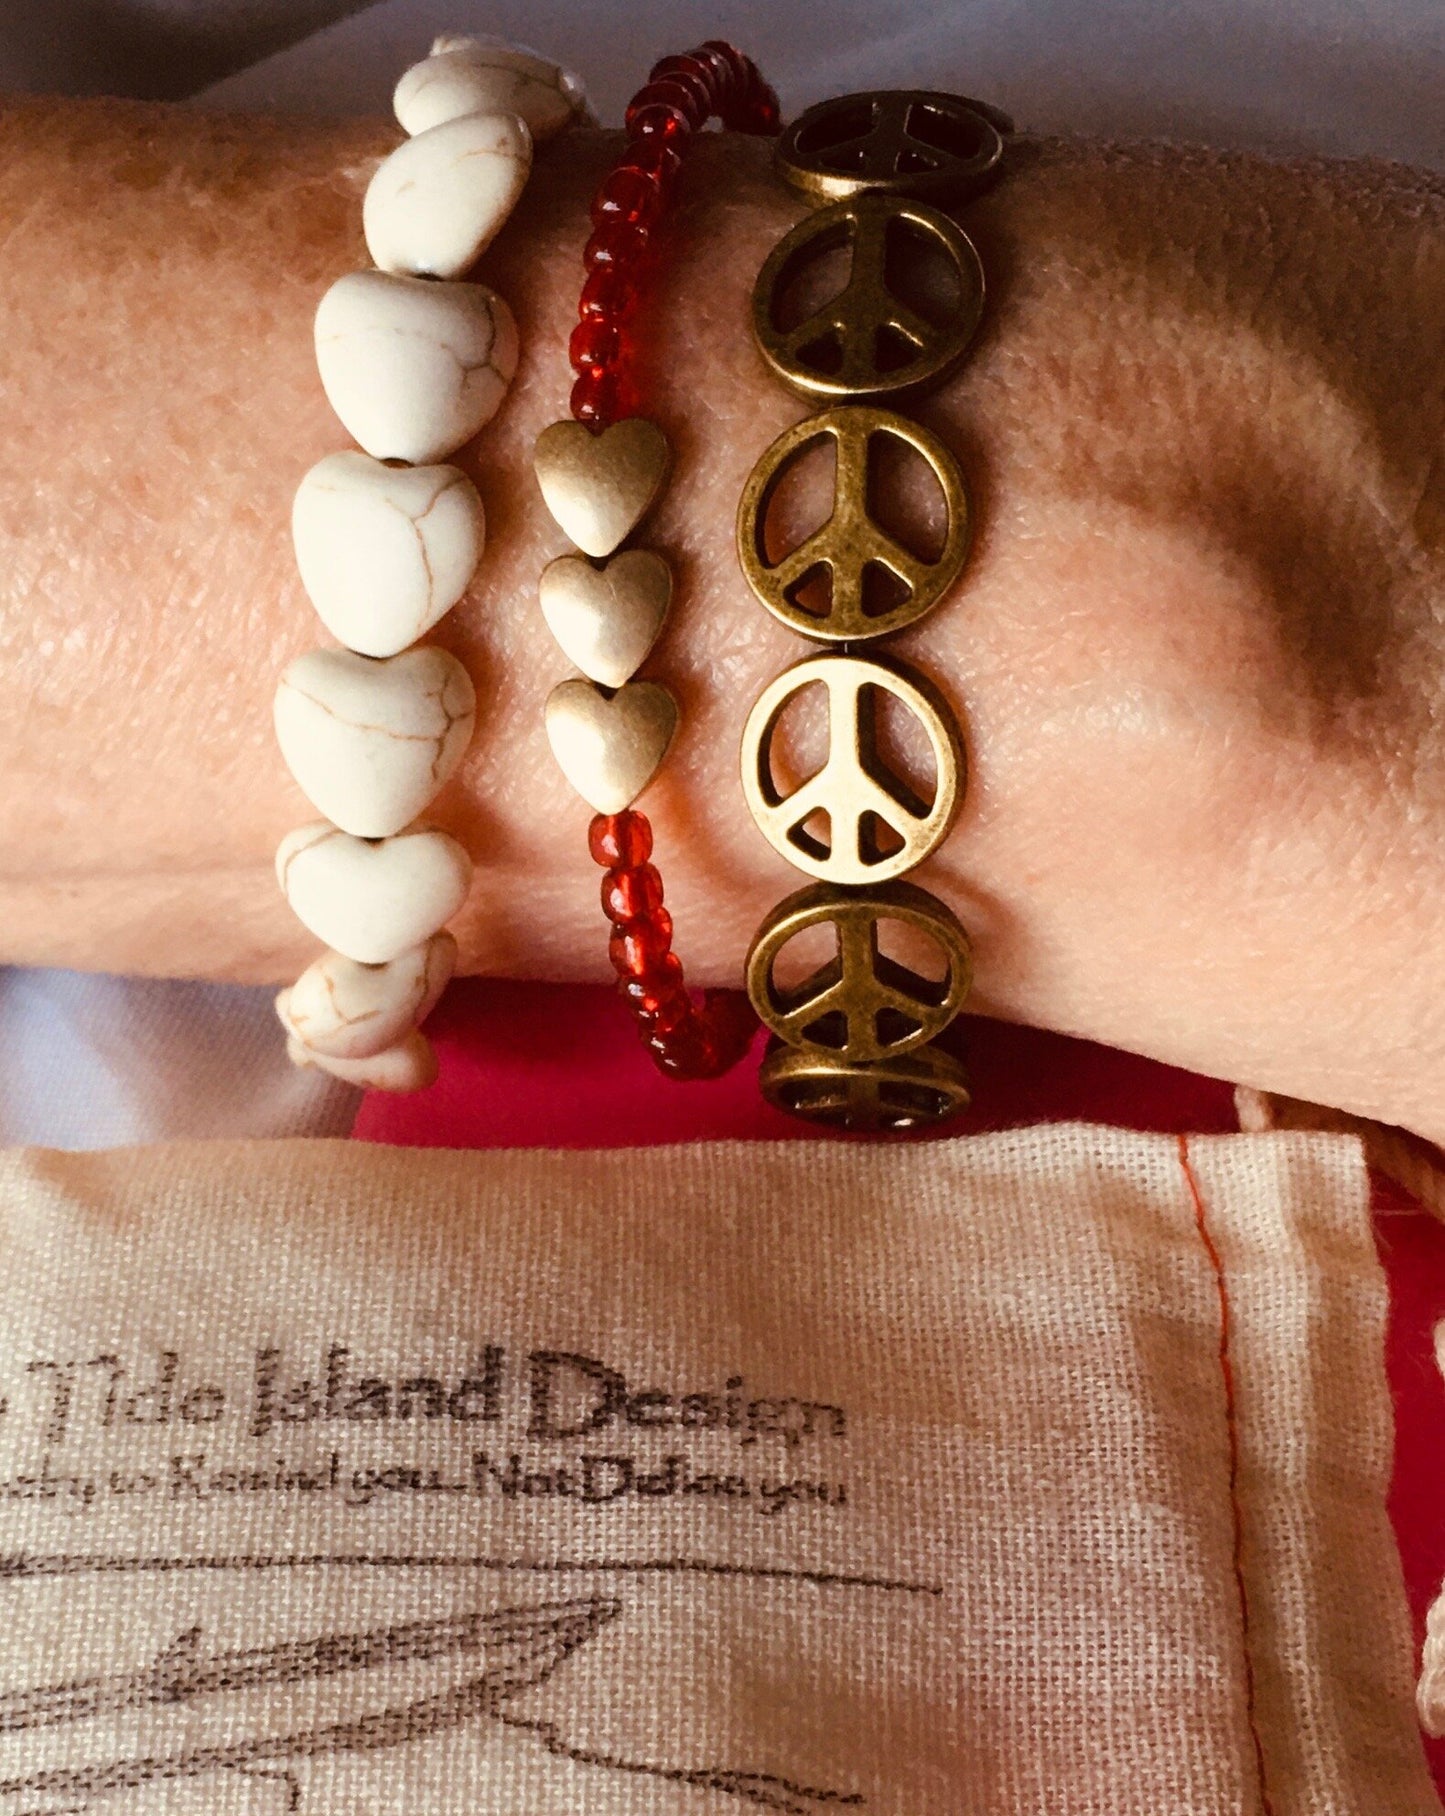 Sweetheart Trio Collection- Limited Time Offer- Expires February 15th - Low Tide Island Designs